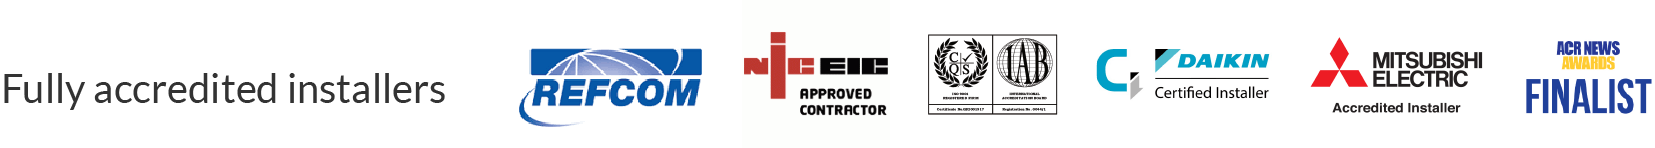 Fully accredited installers